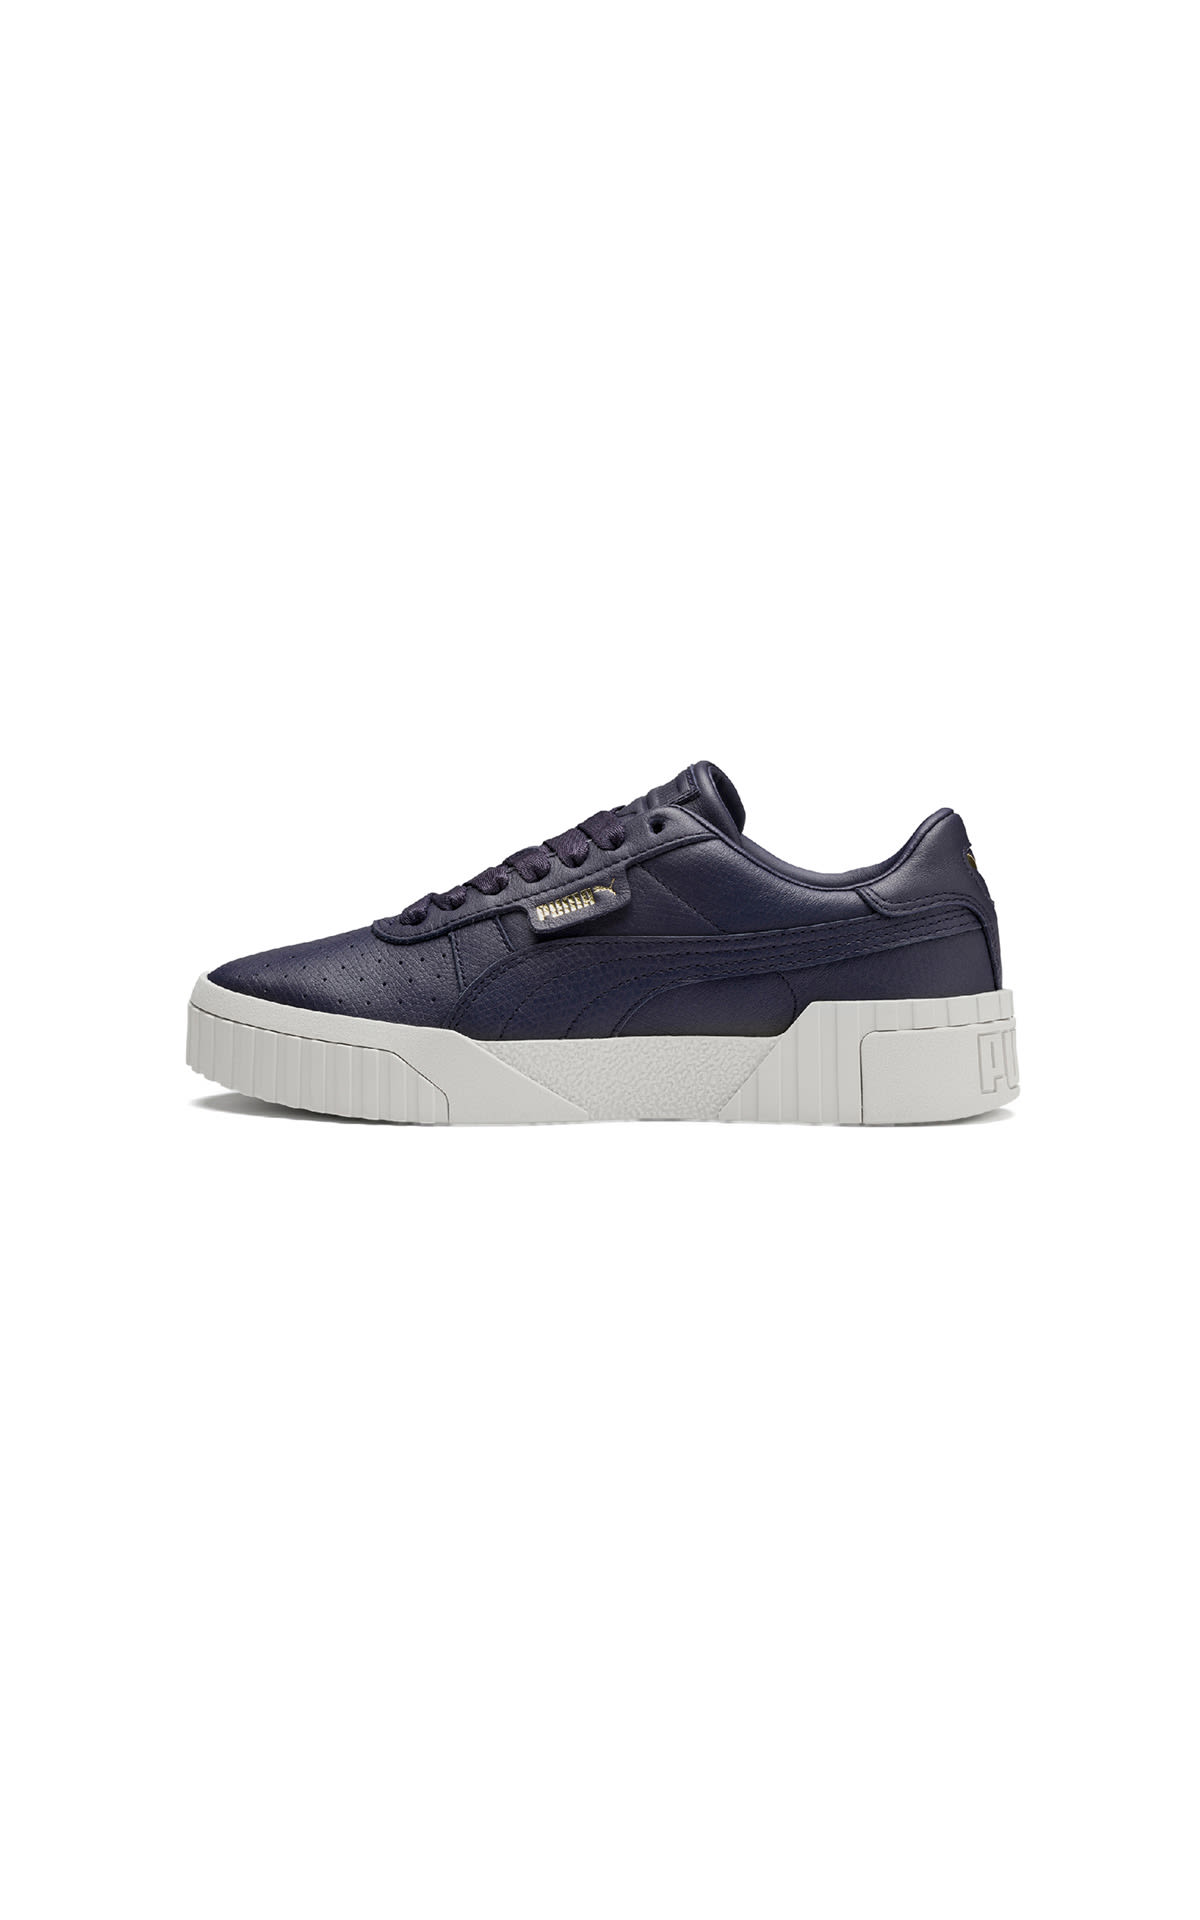 PUMA Cali exotic women's in peacoat at The Bicester Village Shopping Collection